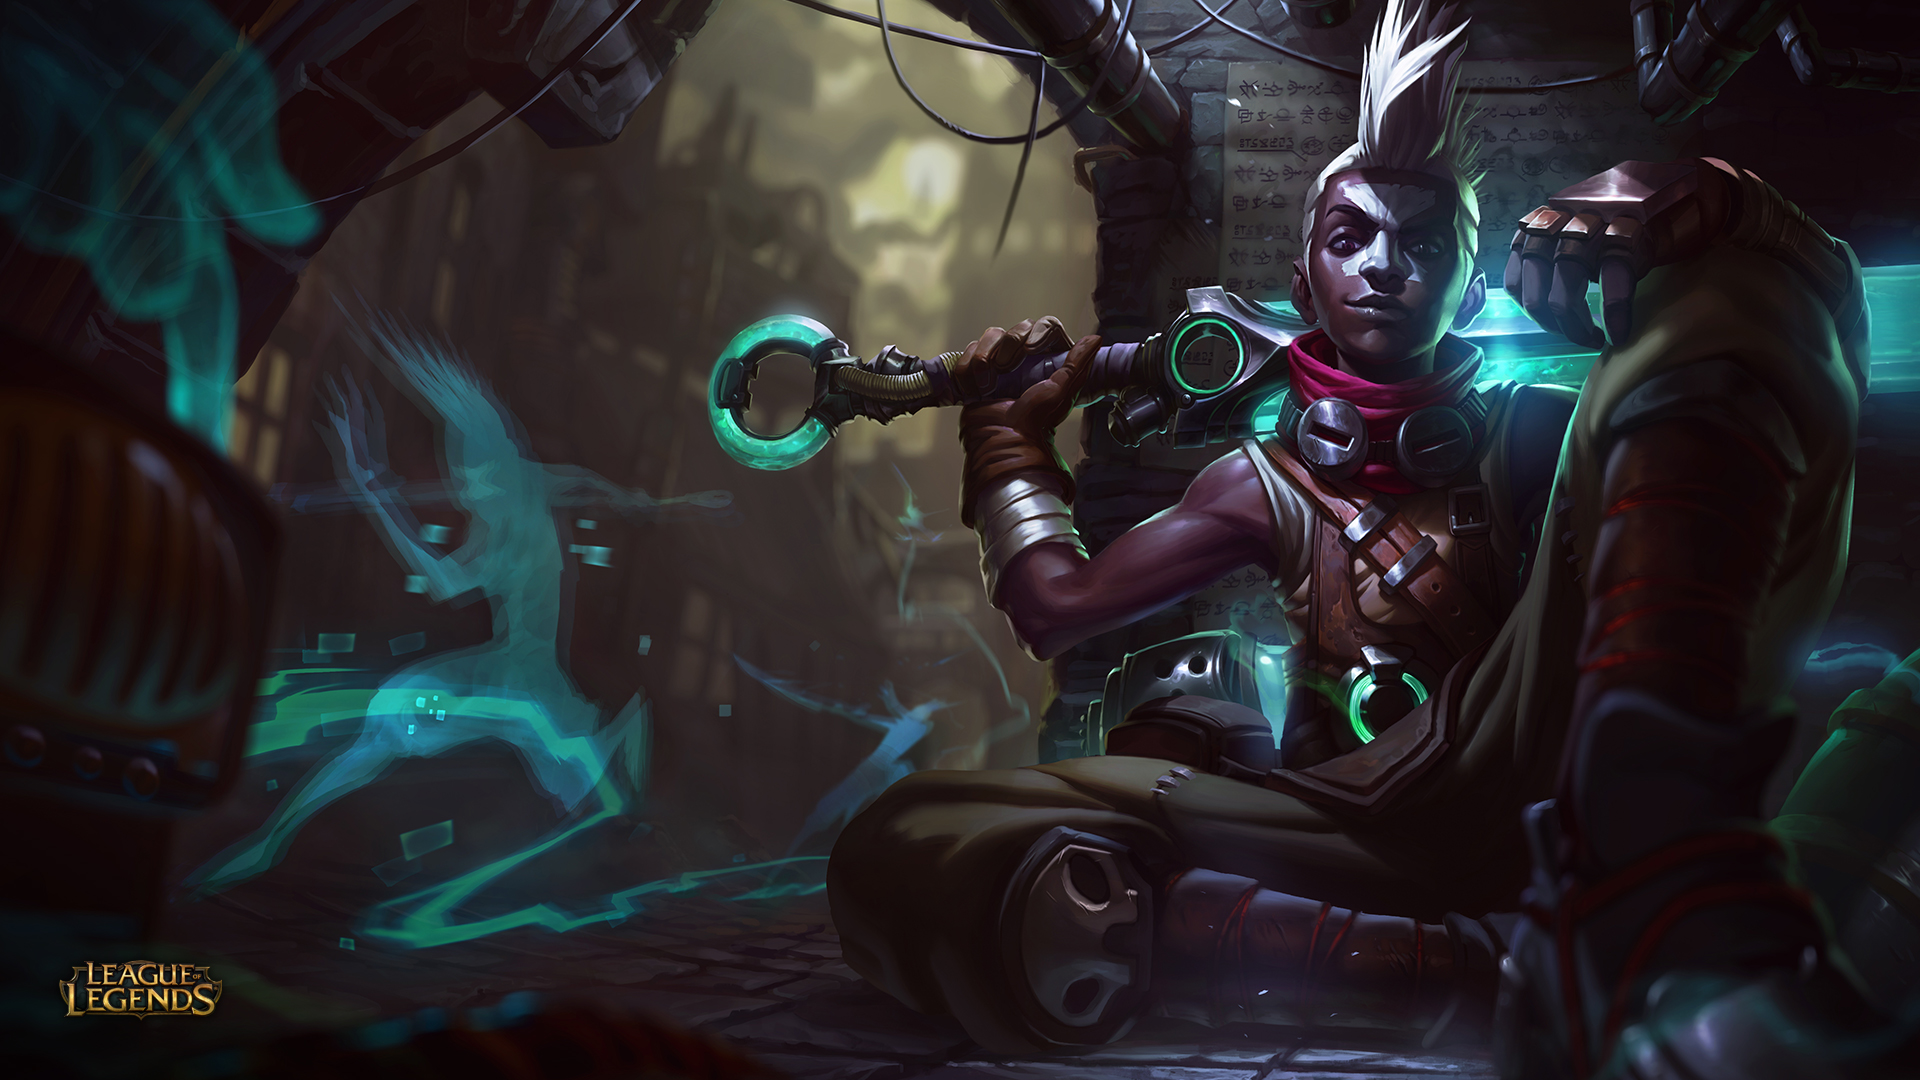 Ekko - The Boy Who Shattered Time Full HD Wallpaper and Background